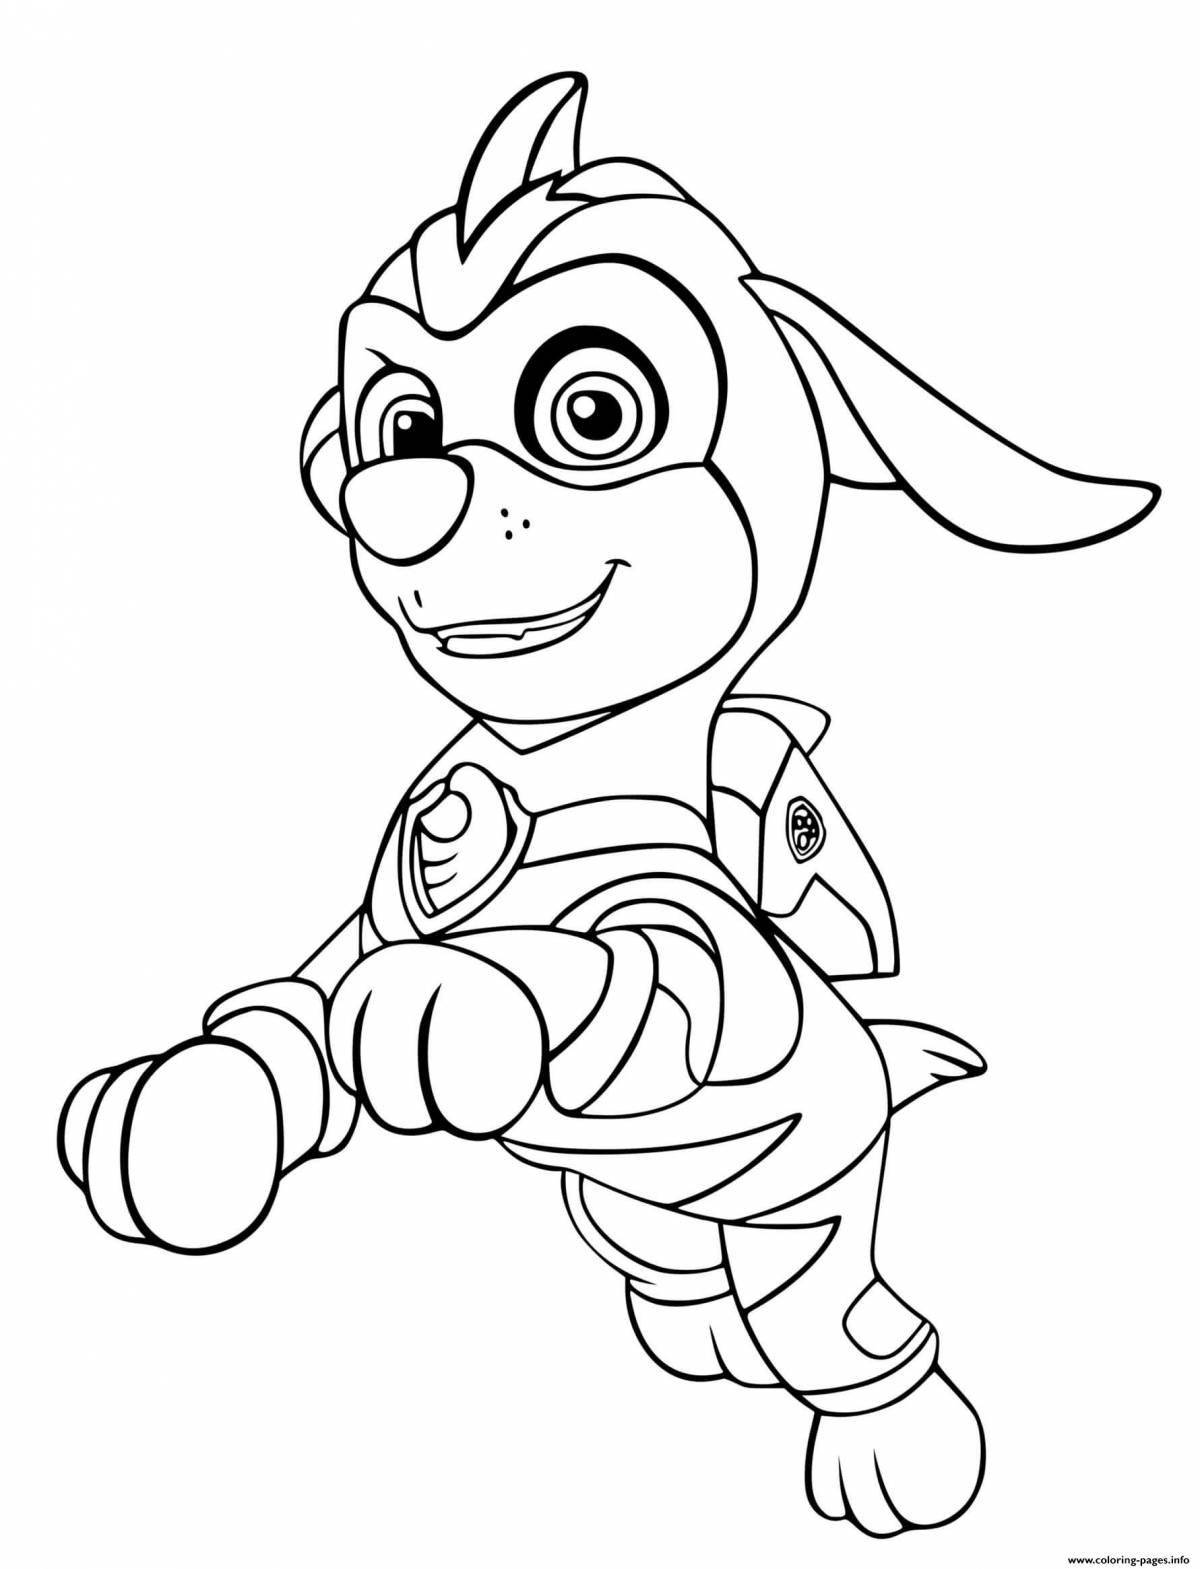 Coloring page dazzling paw patrol puppies